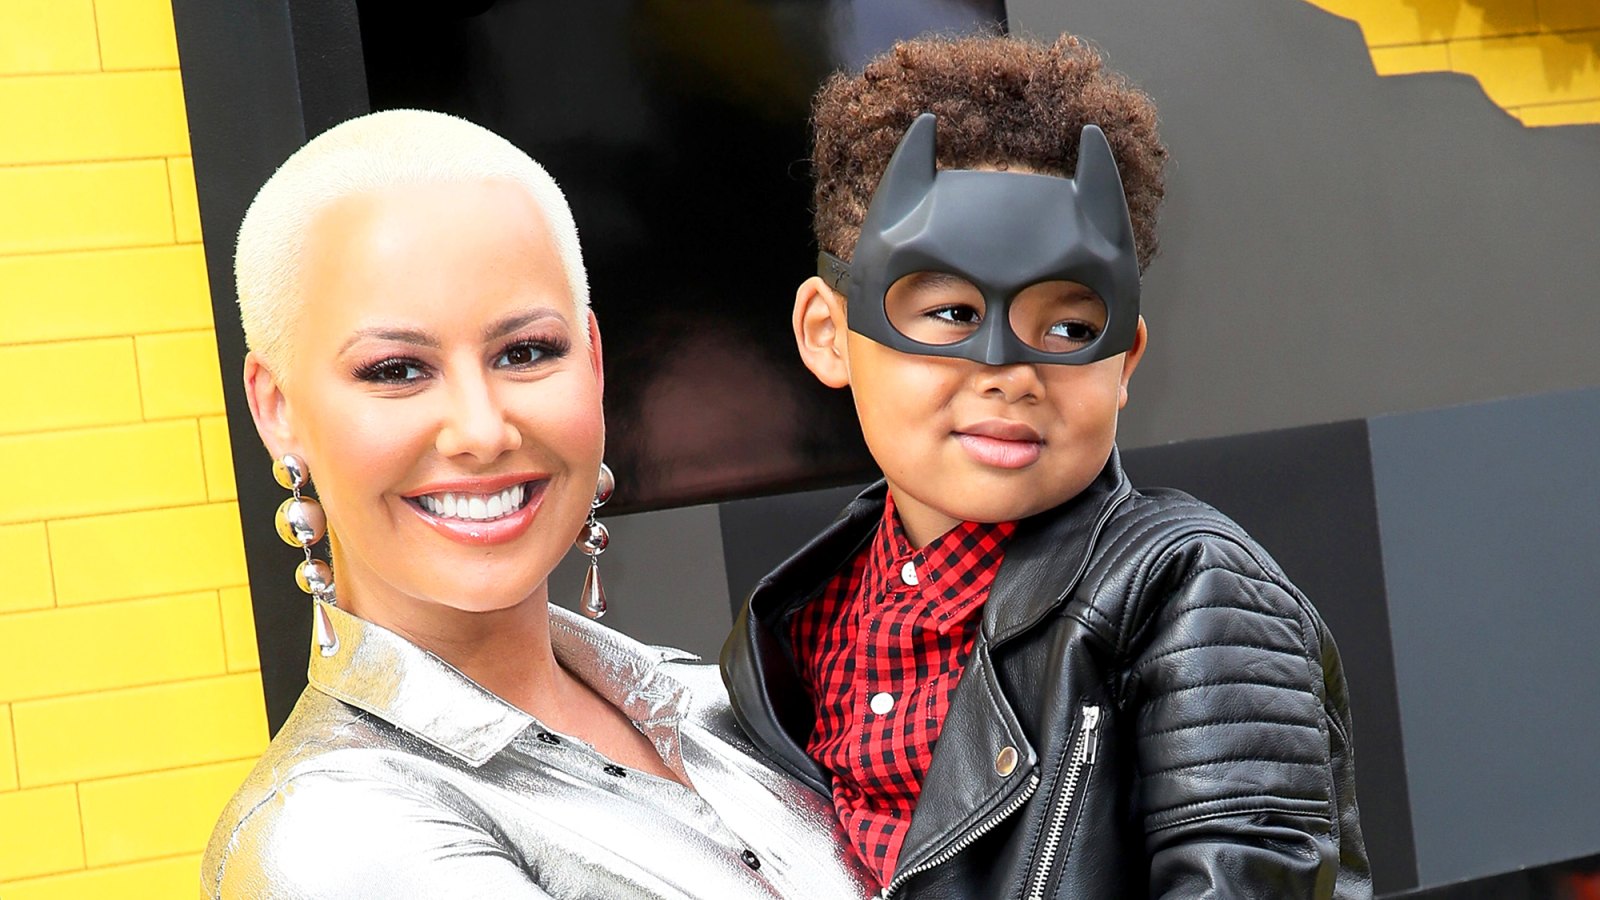 Amber Rose and son Sebastian attend the 2017 Premiere of Warner Bros. Pictures' "The LEGO Batman Movie" at the Regency Village Theatre in Westwood, California.